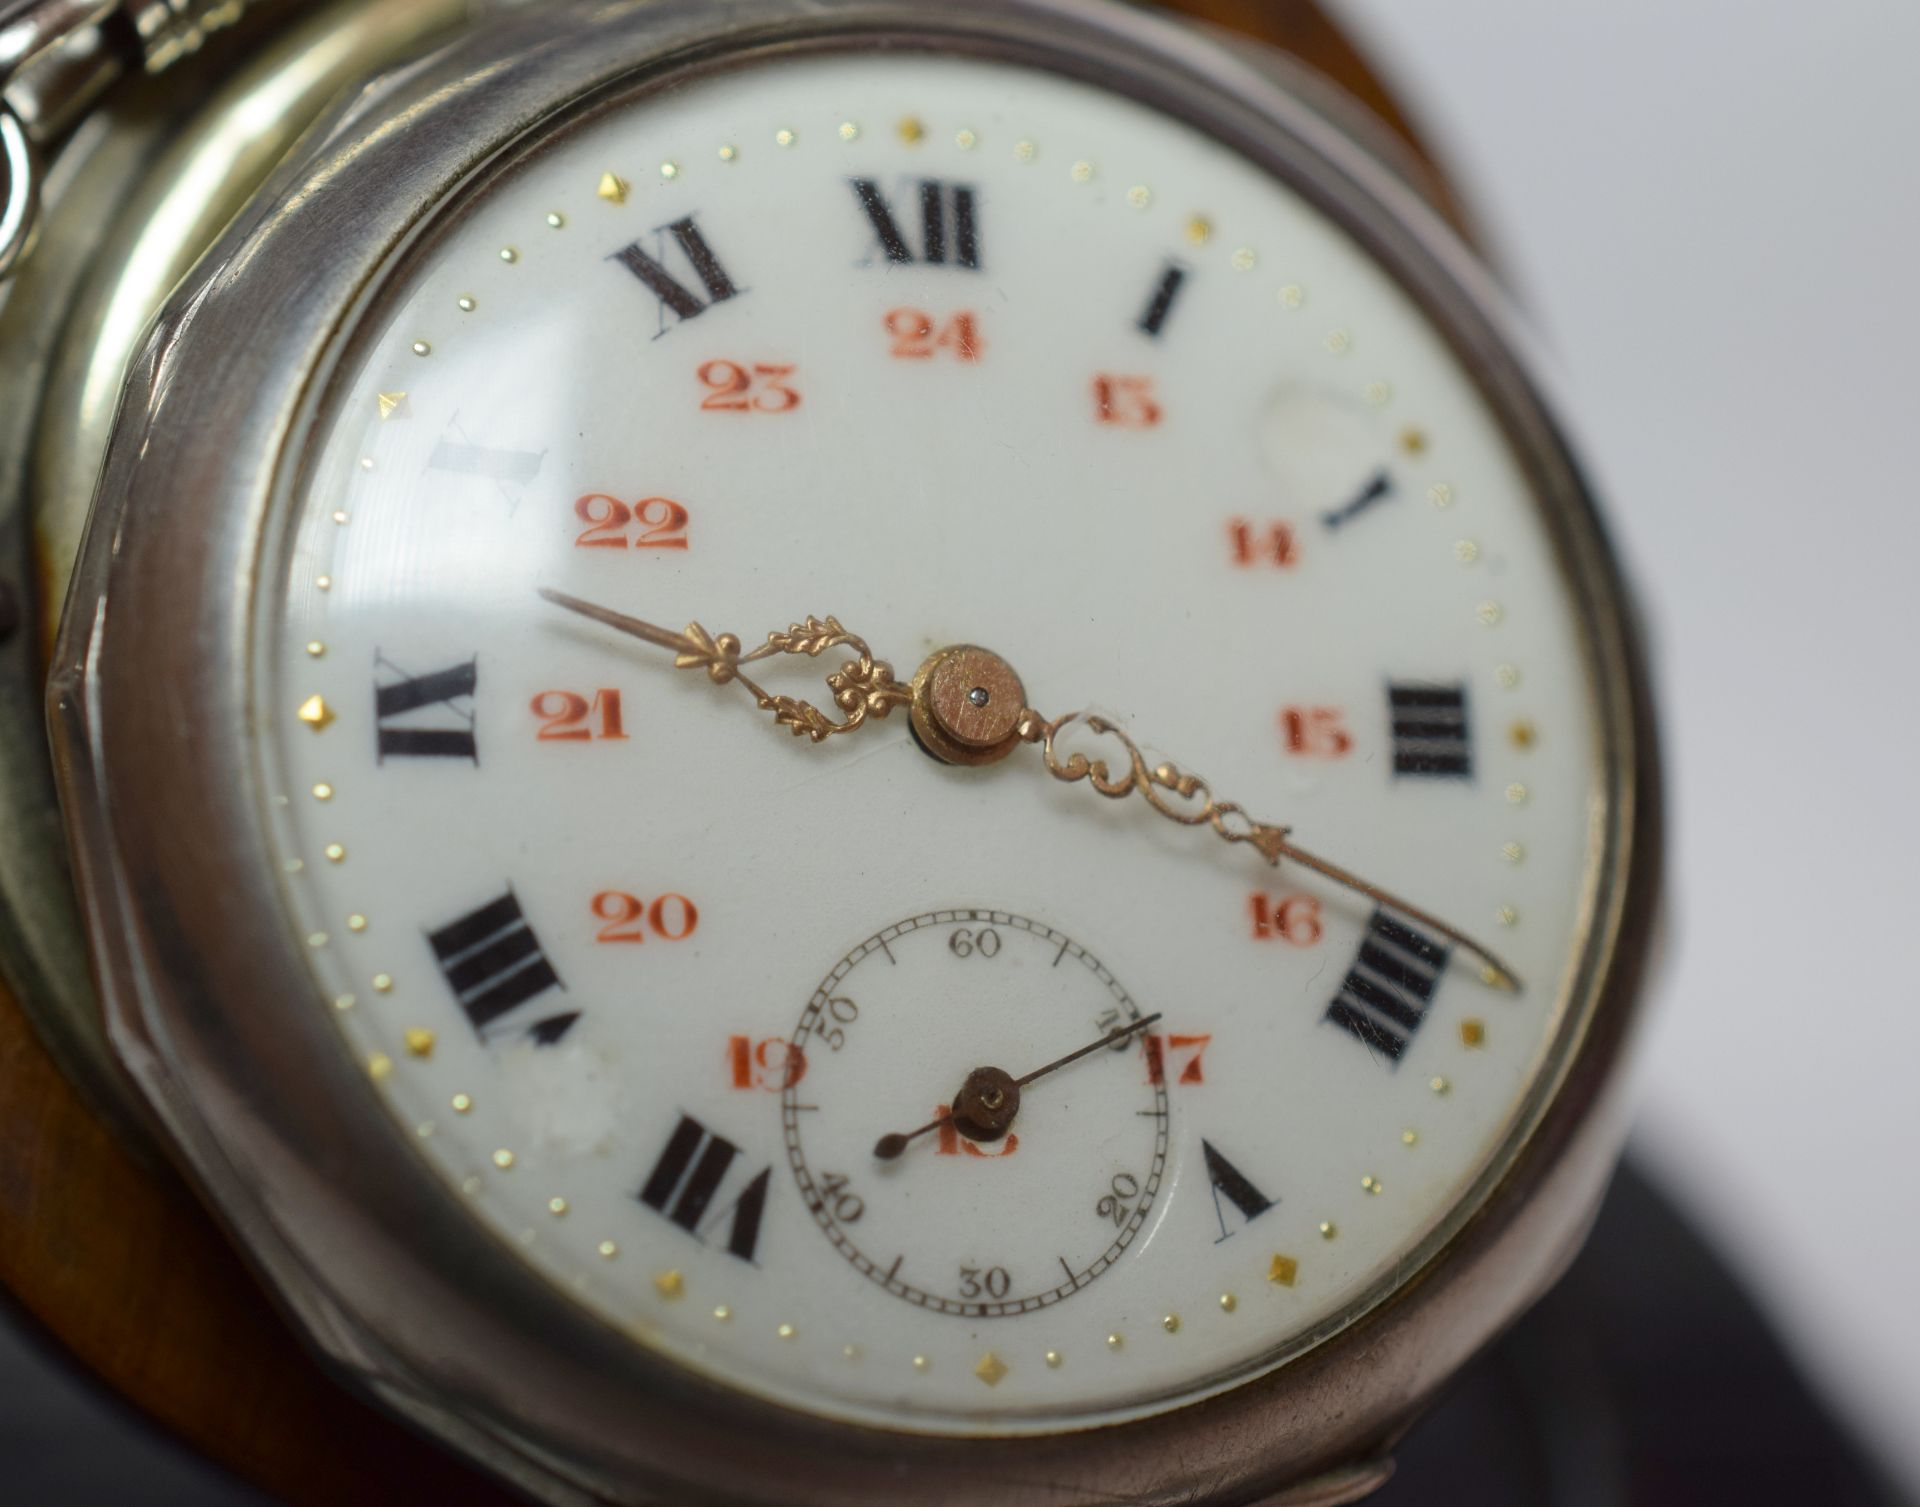 Silver Cased French Pocket Watch With Movement Signed C.Crettiez On Display Stand - Image 2 of 9